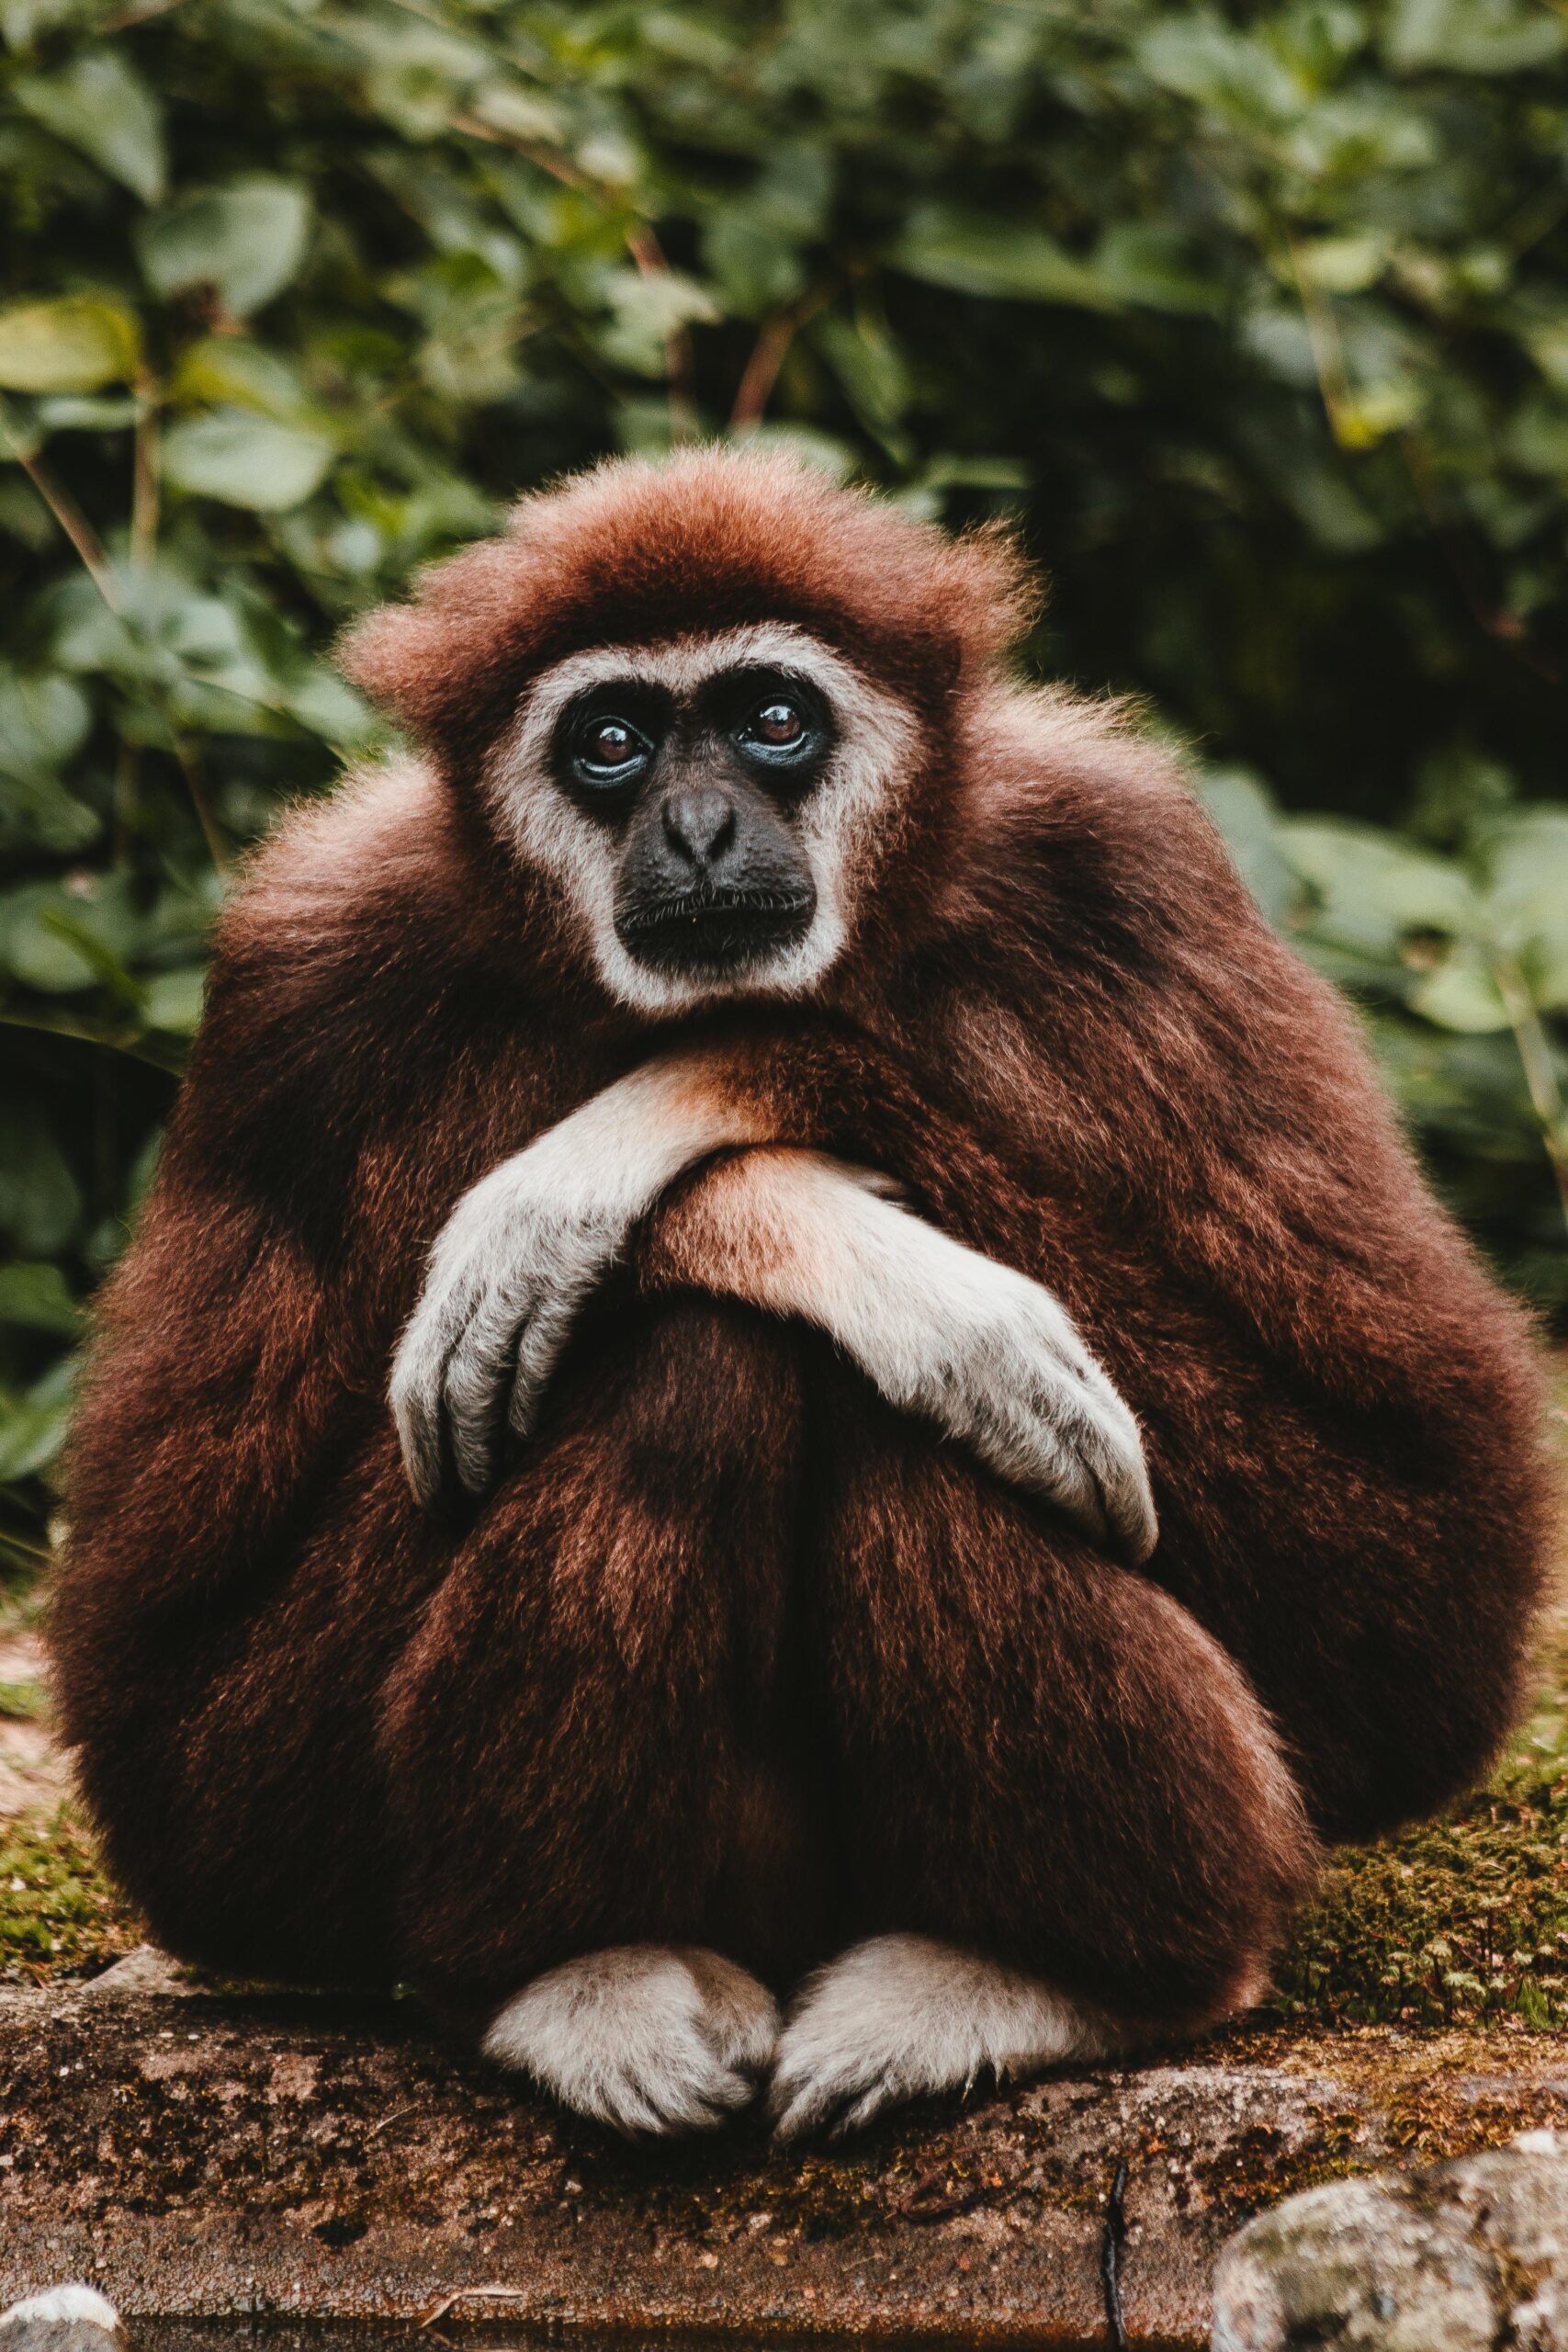 Download wallpapers gibbon, pensive, sitting, cute